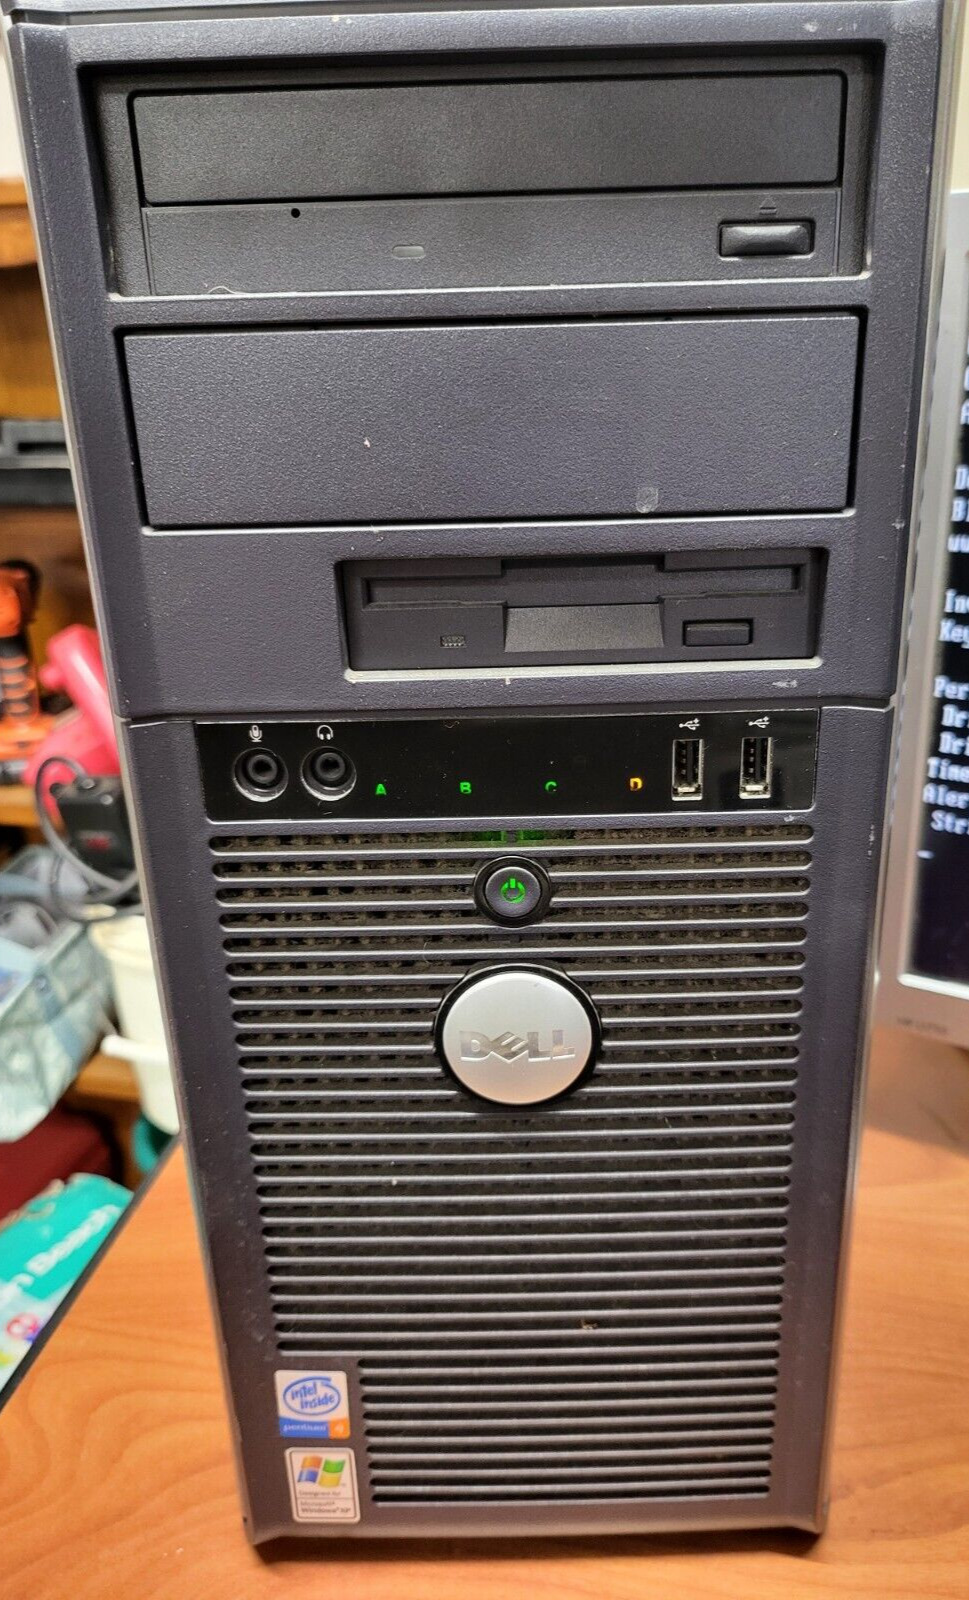 Computer Dell Optiplex GX280 Tower Only  Windows XP Professional    Works Fine